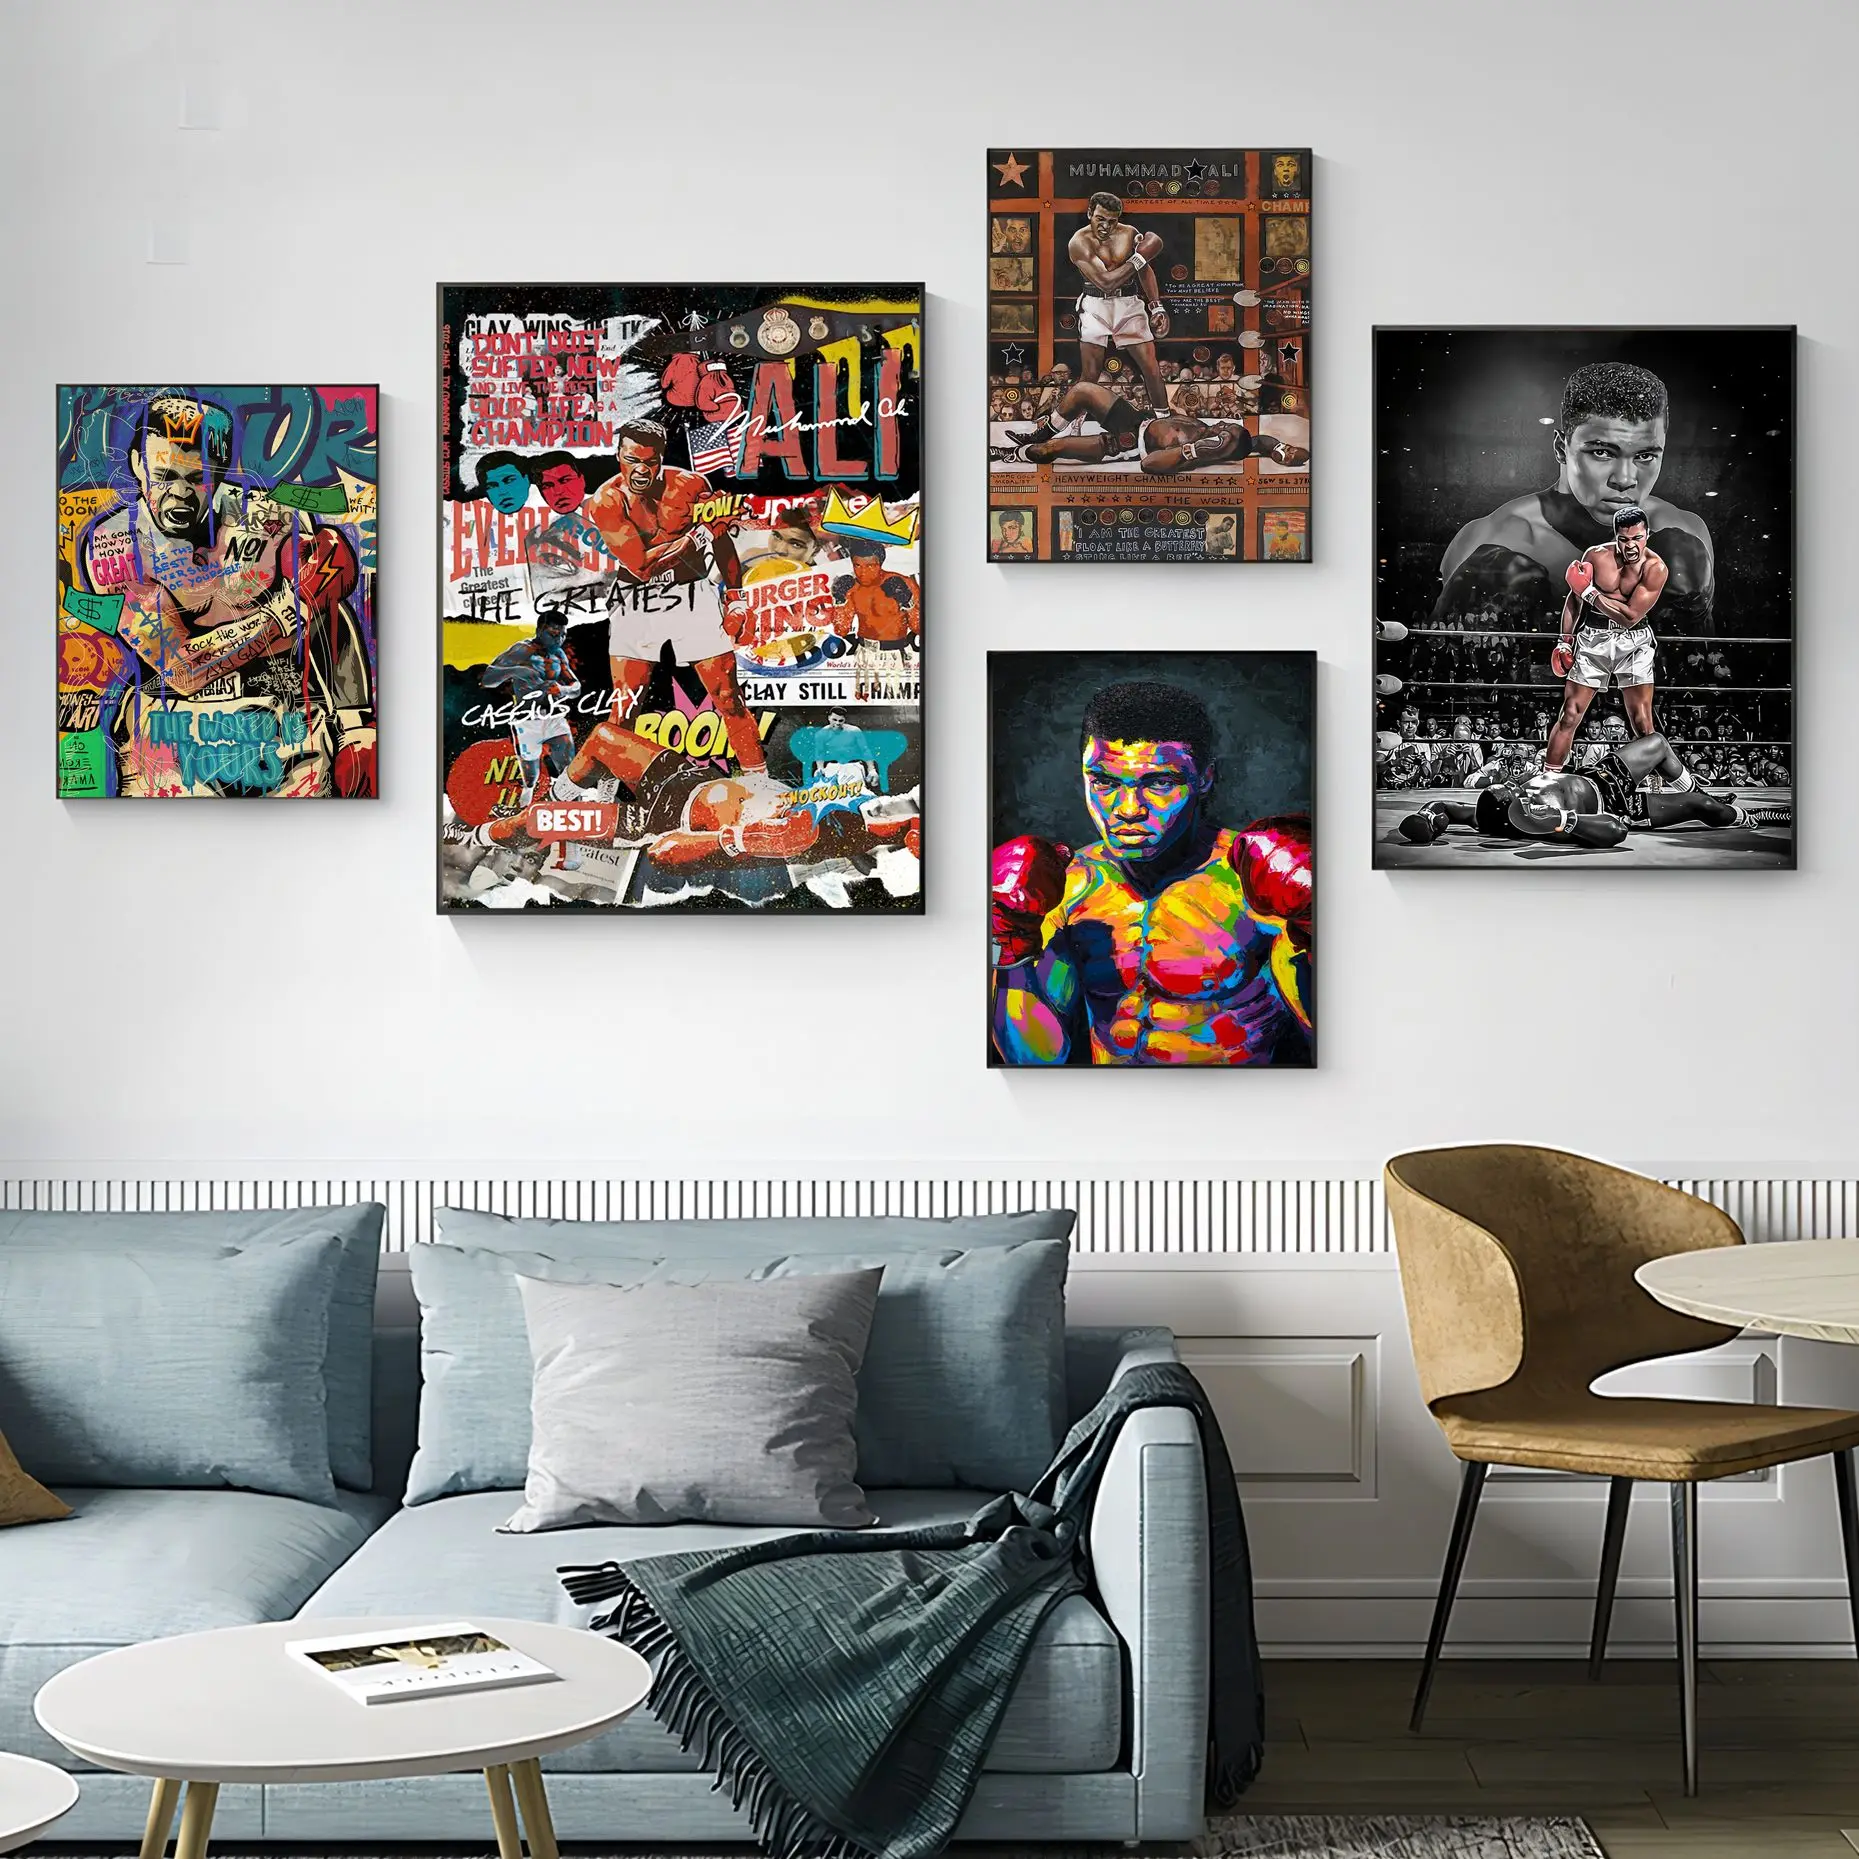 Boxing Champion Muhammad Ali Beat It Classic Vintage Posters Vintage Room Home Bar Cafe Decor Wall Decor